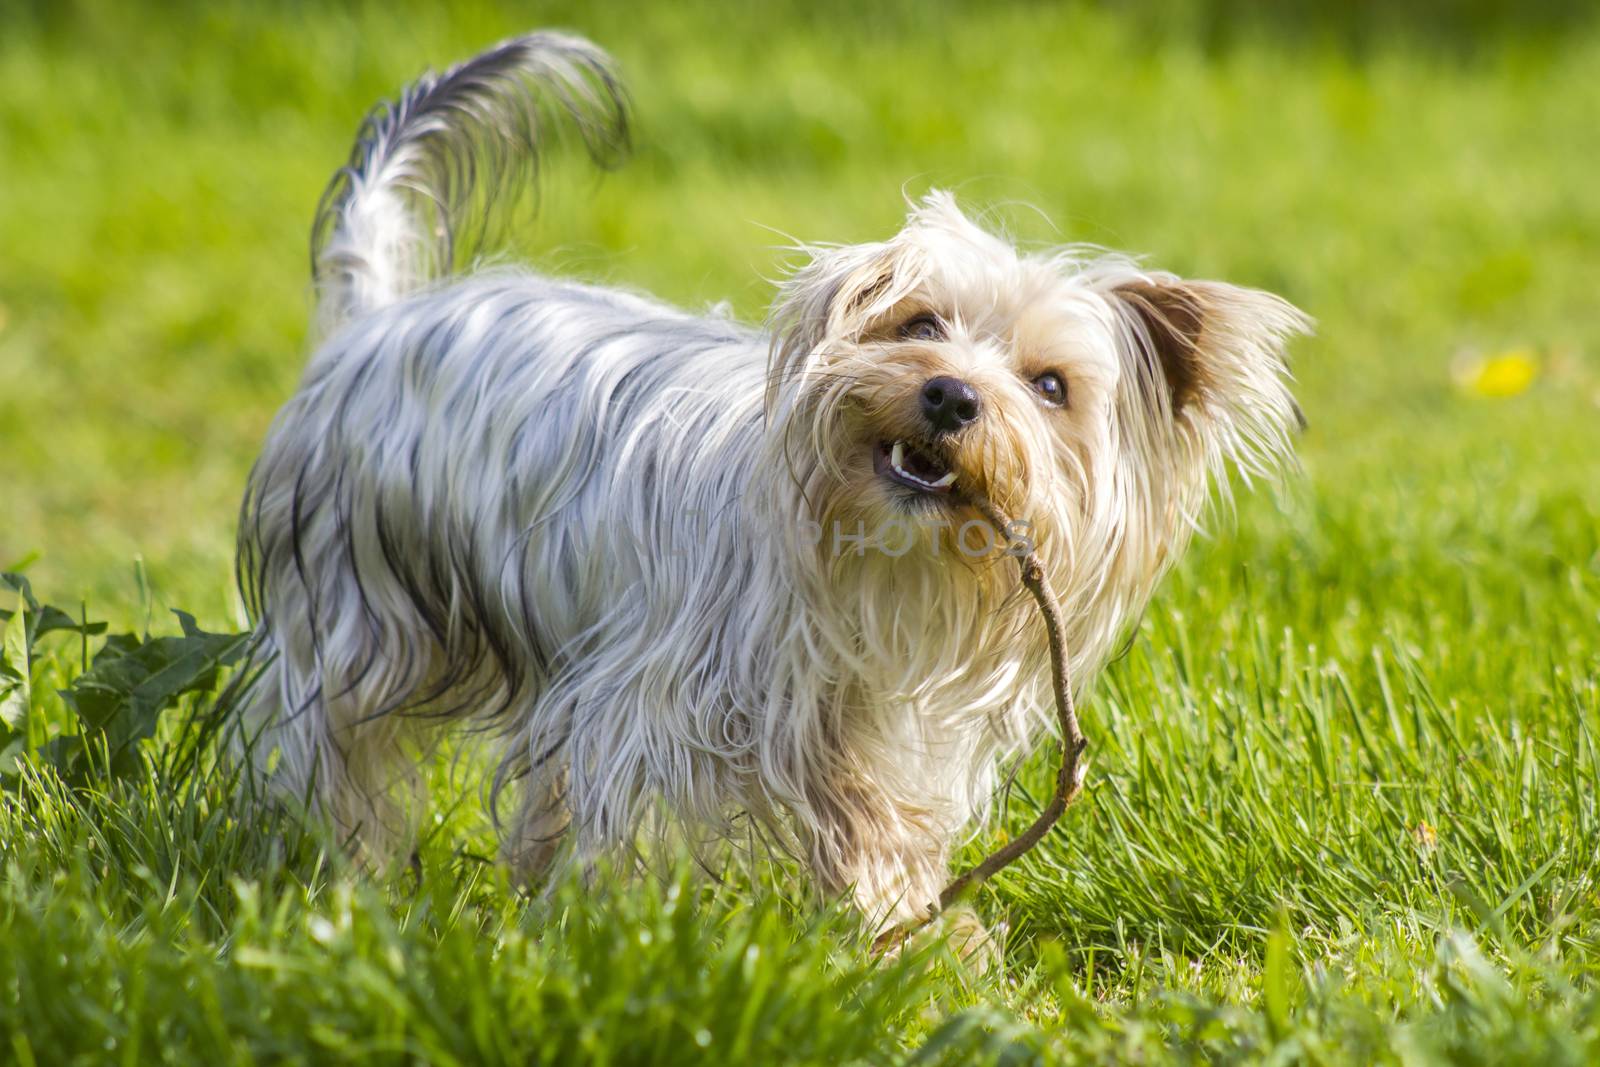 yorkshire terrier playing in the garden by miradrozdowski